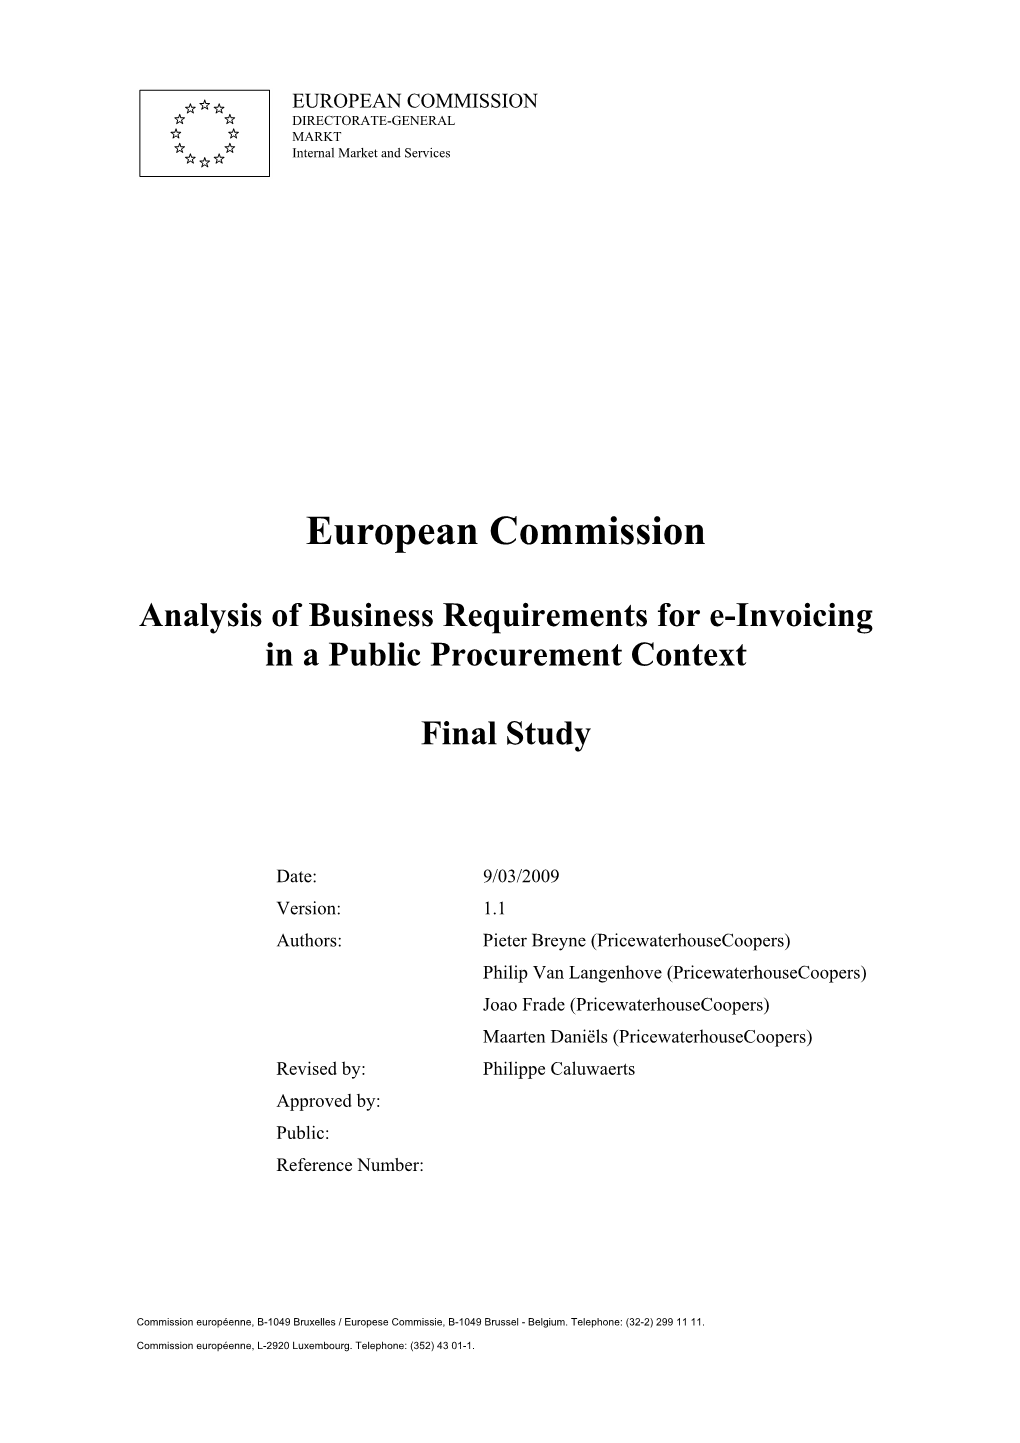 Analysis of Business Requirements for E-Invoicing in a Public Procurement Context